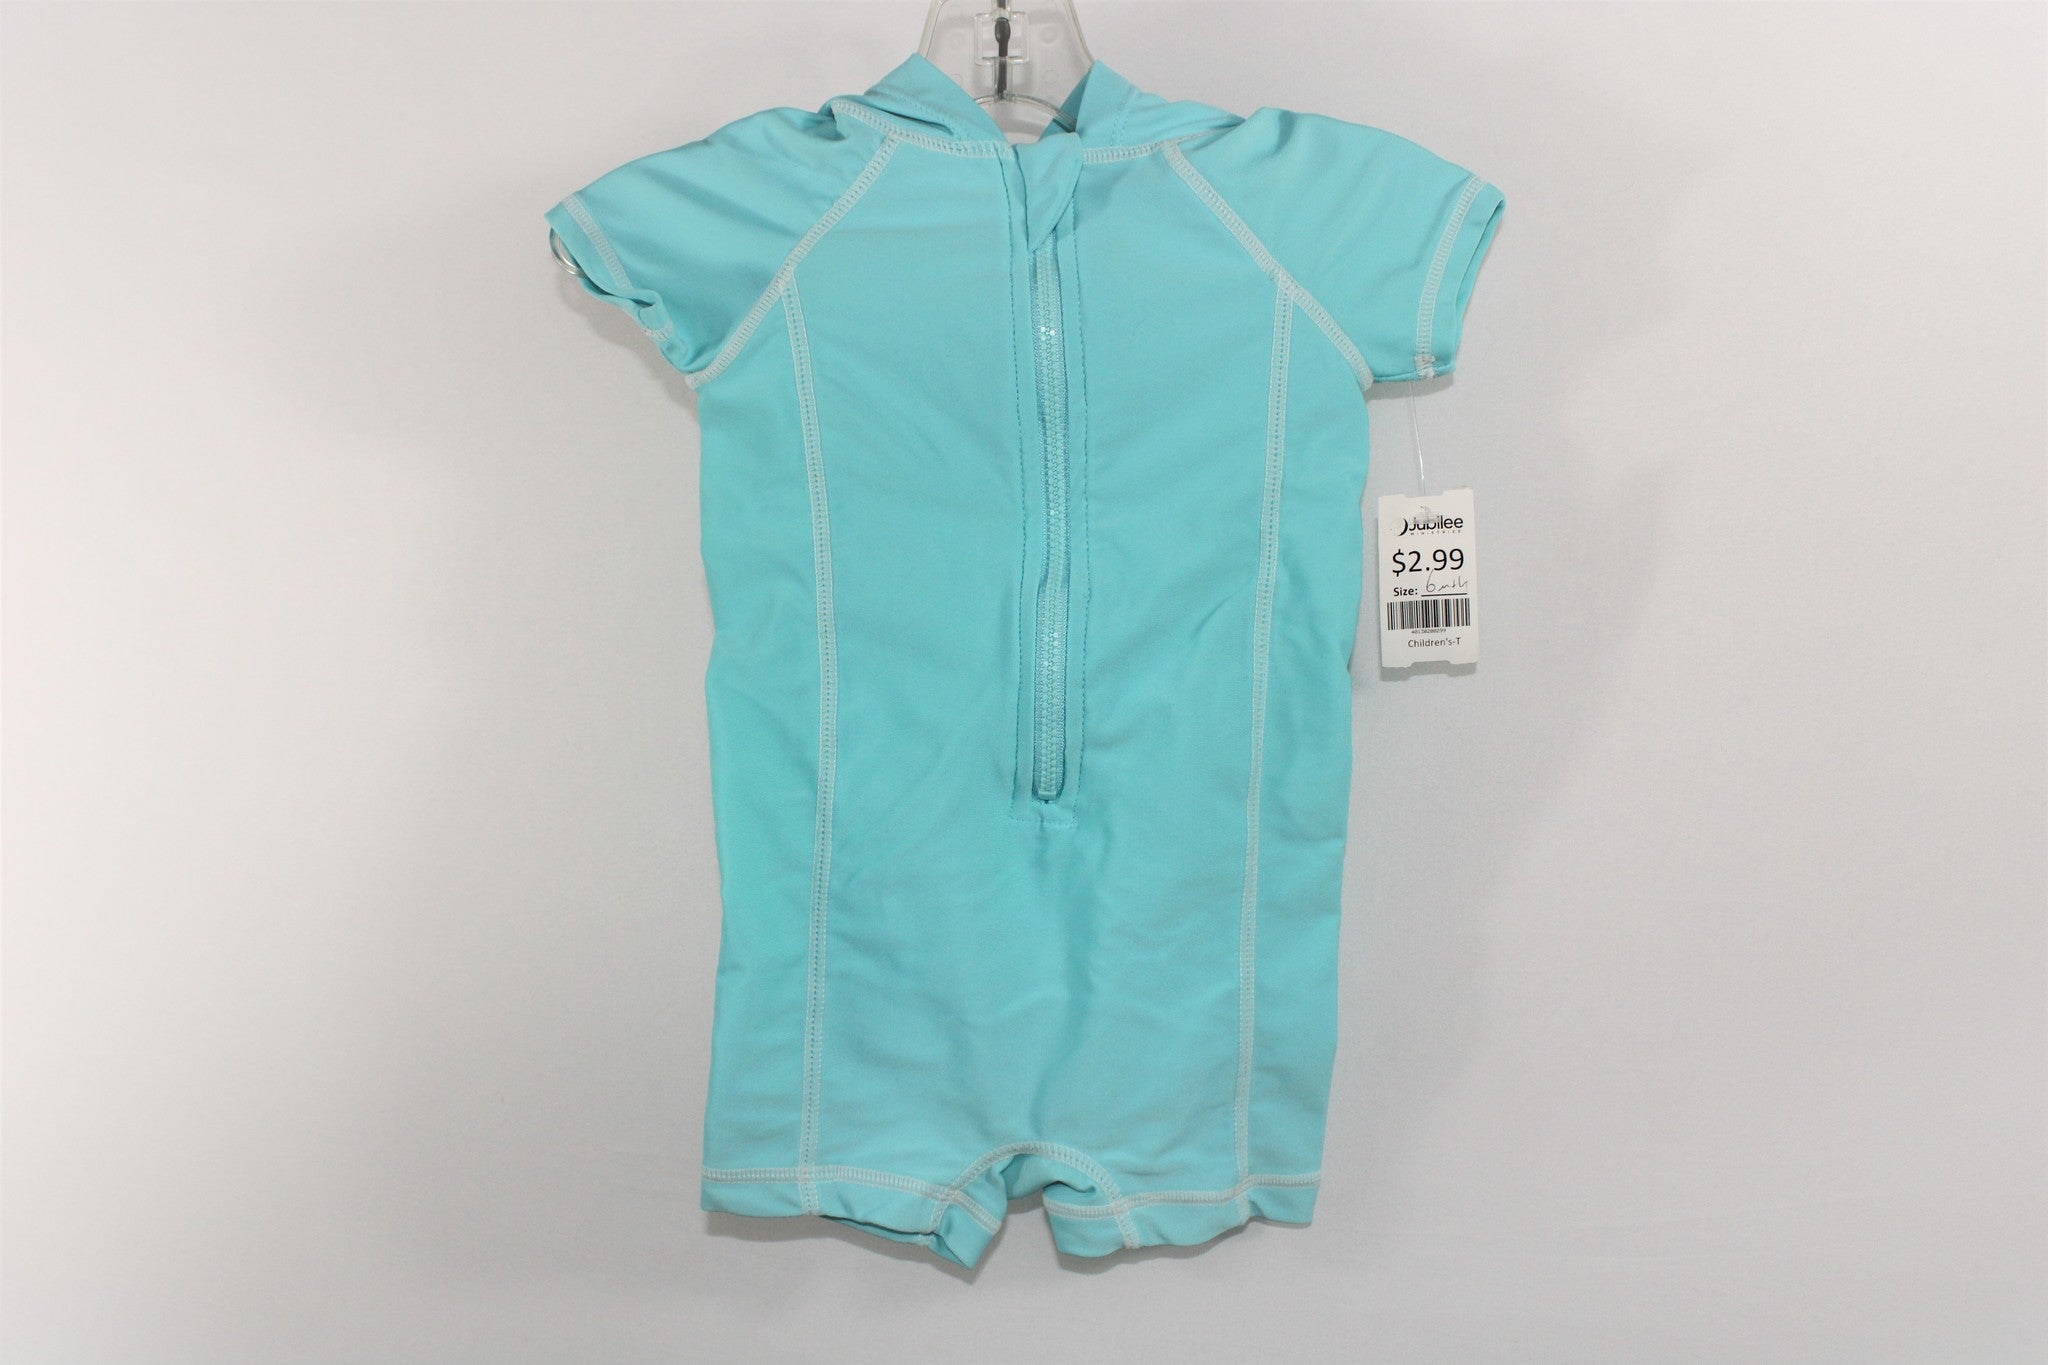 Blue Zip-Up Swim Outfit | 6-12 Months